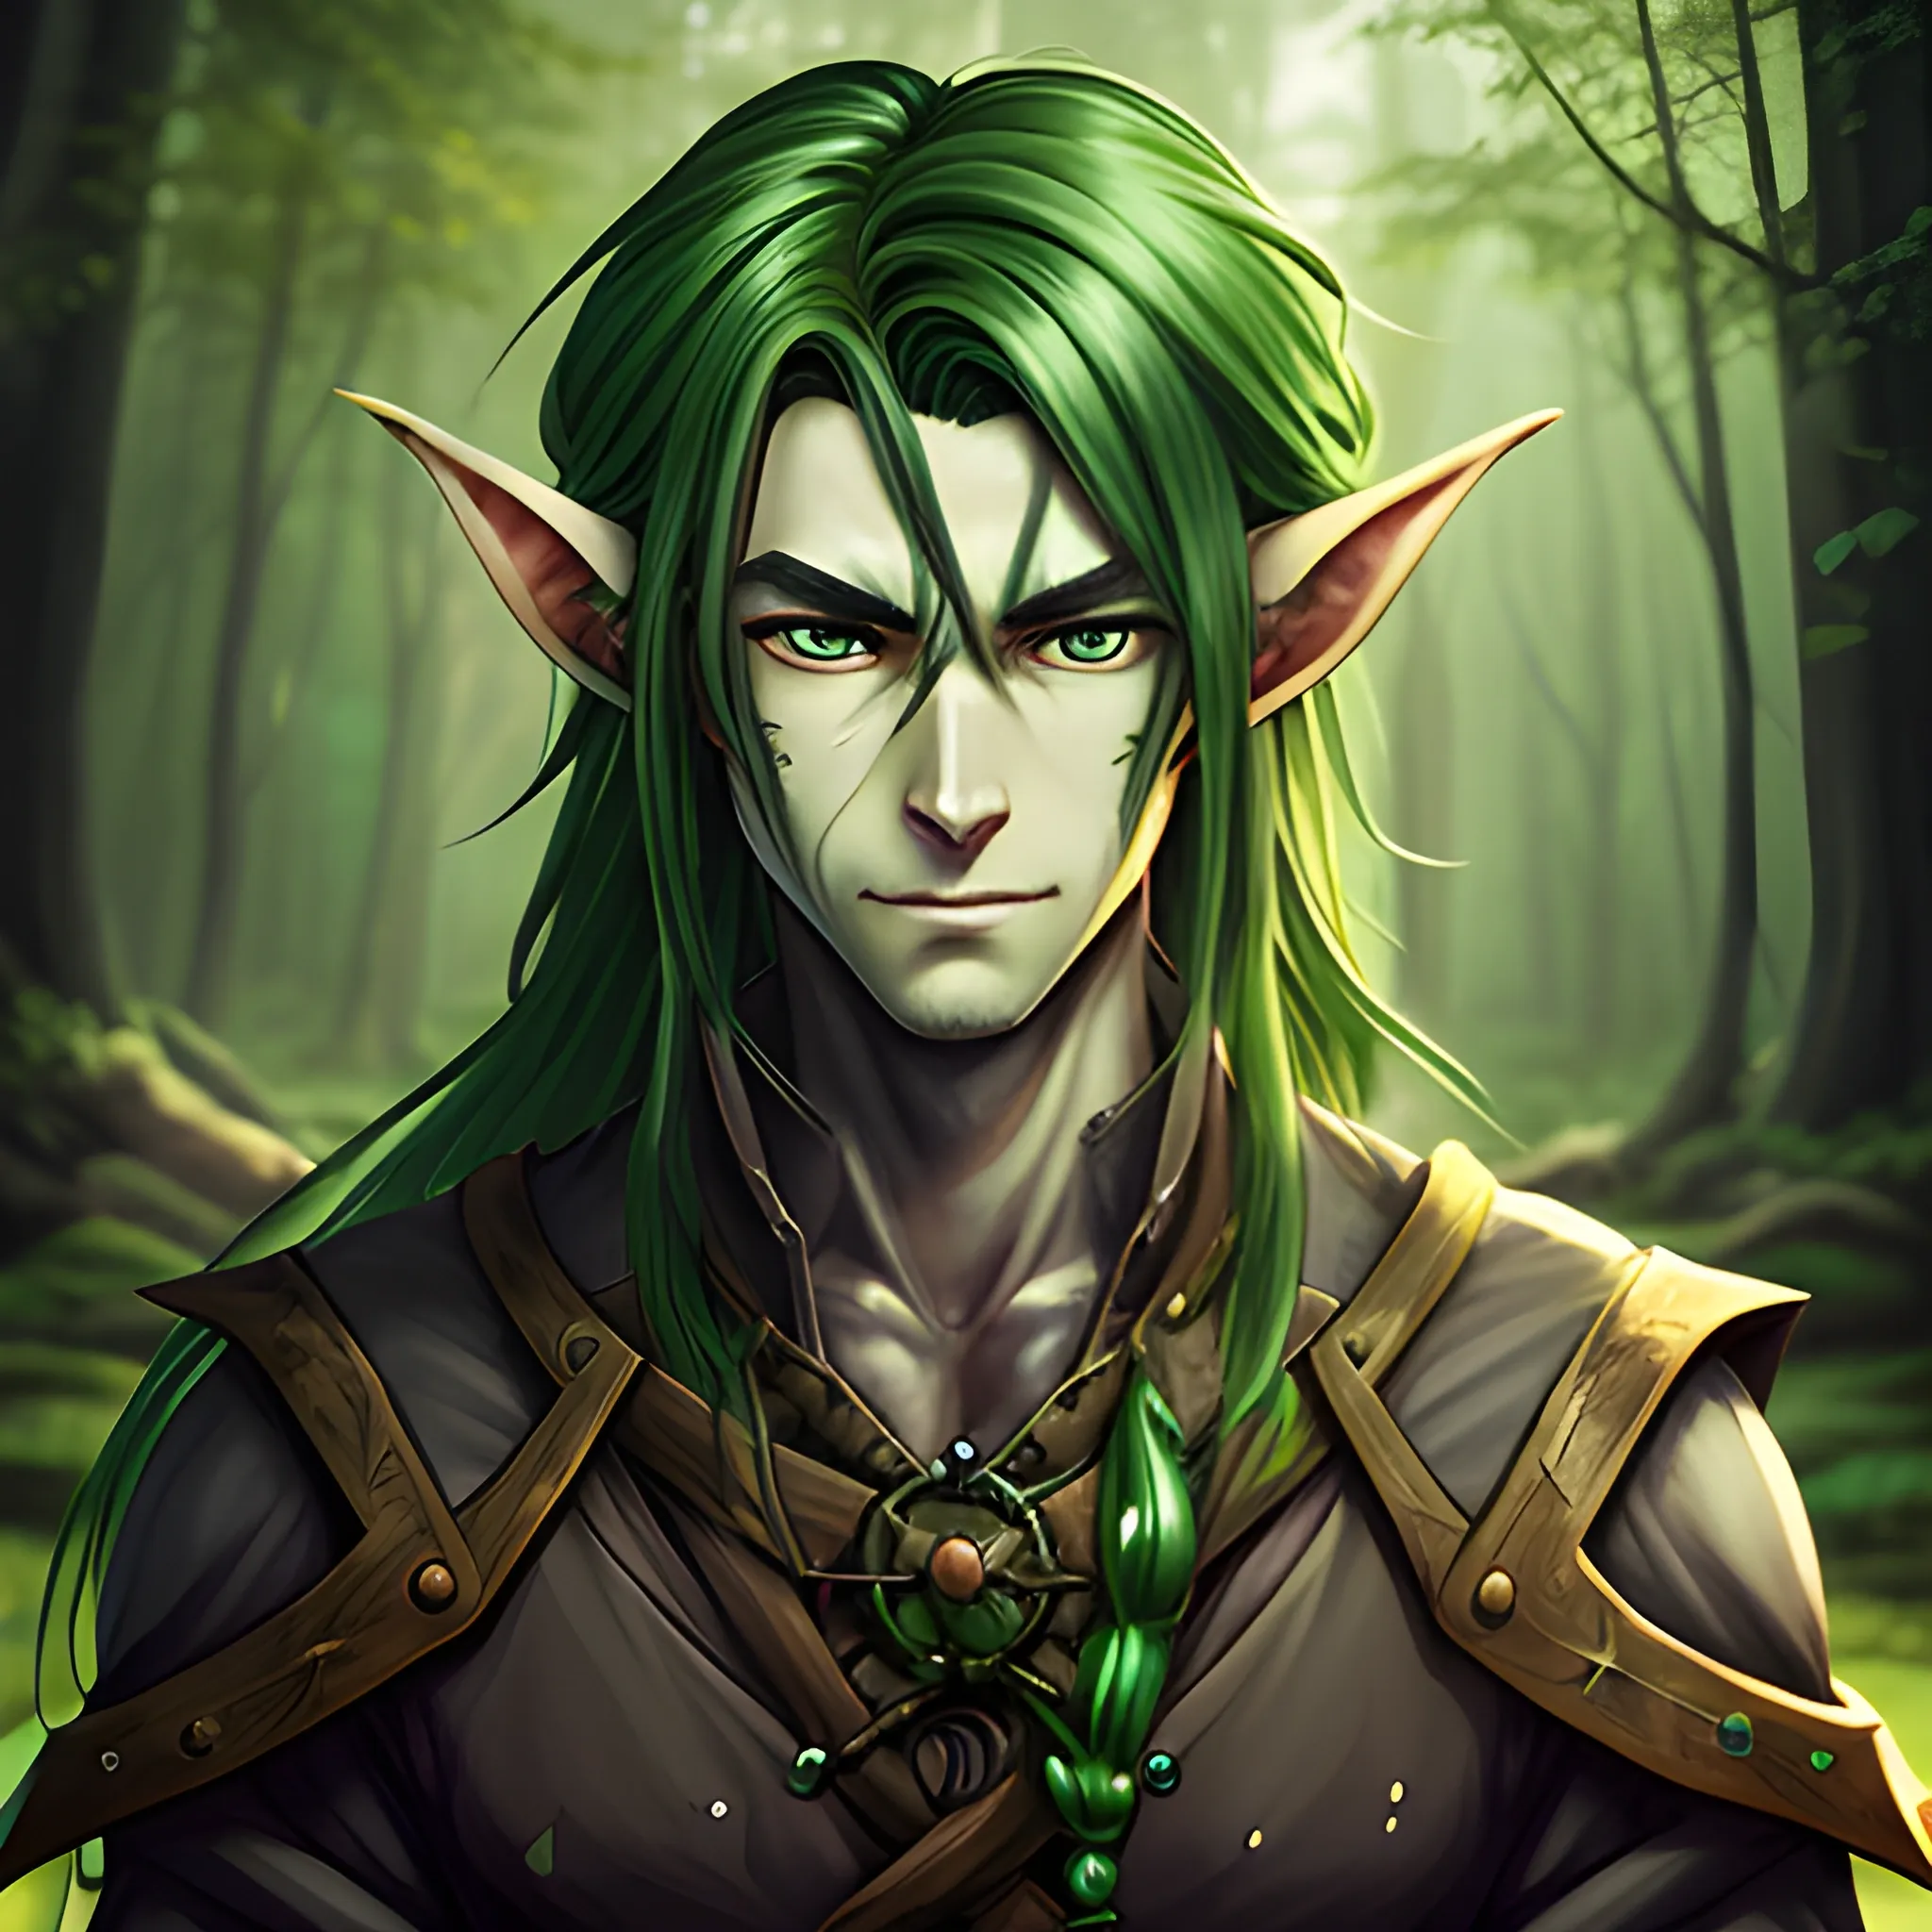 half body portrait, highly detailed, smith, merchant, high fantasy, handsome, dynamic pose, forest nymph, backlit, holy, blacksmith, electric, elf, forge, manga style, anime, long hair, facial markings, fall season, green skin